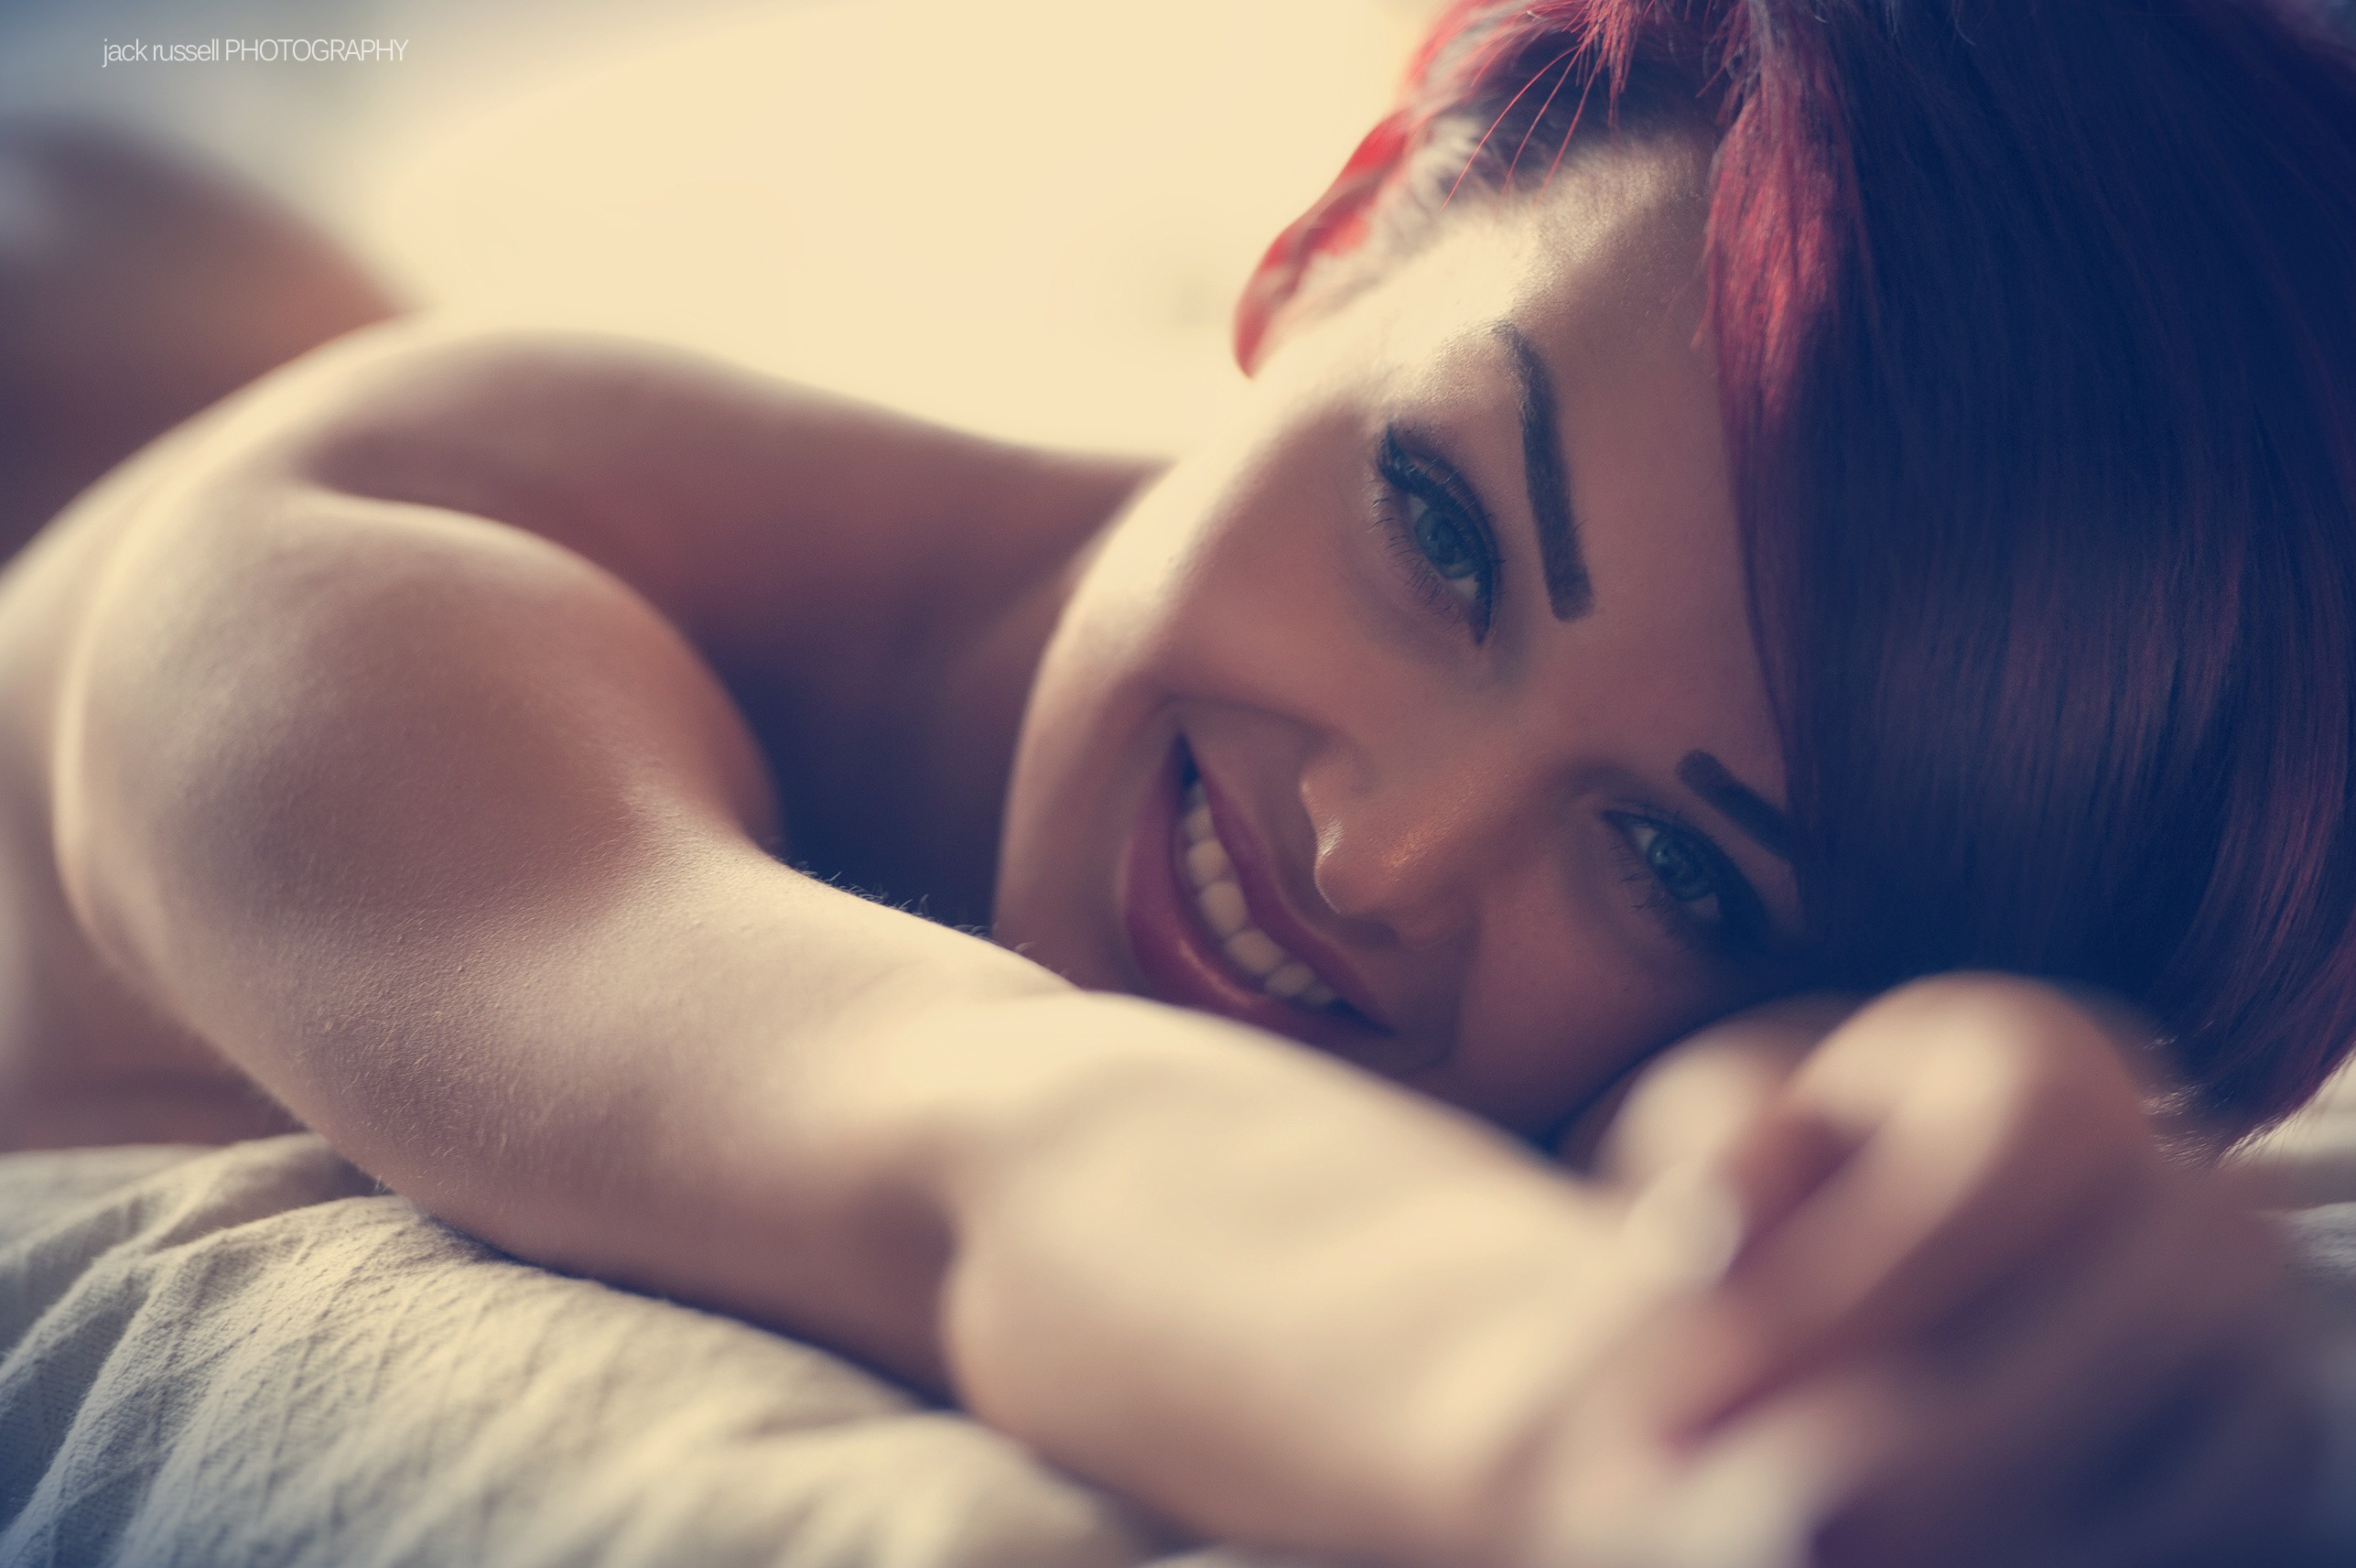 People 2574x1713 women short hair redhead in bed face Rosie Robinson Jack Russell lying on front indoors women indoors smiling makeup dyed hair British women British model closeup